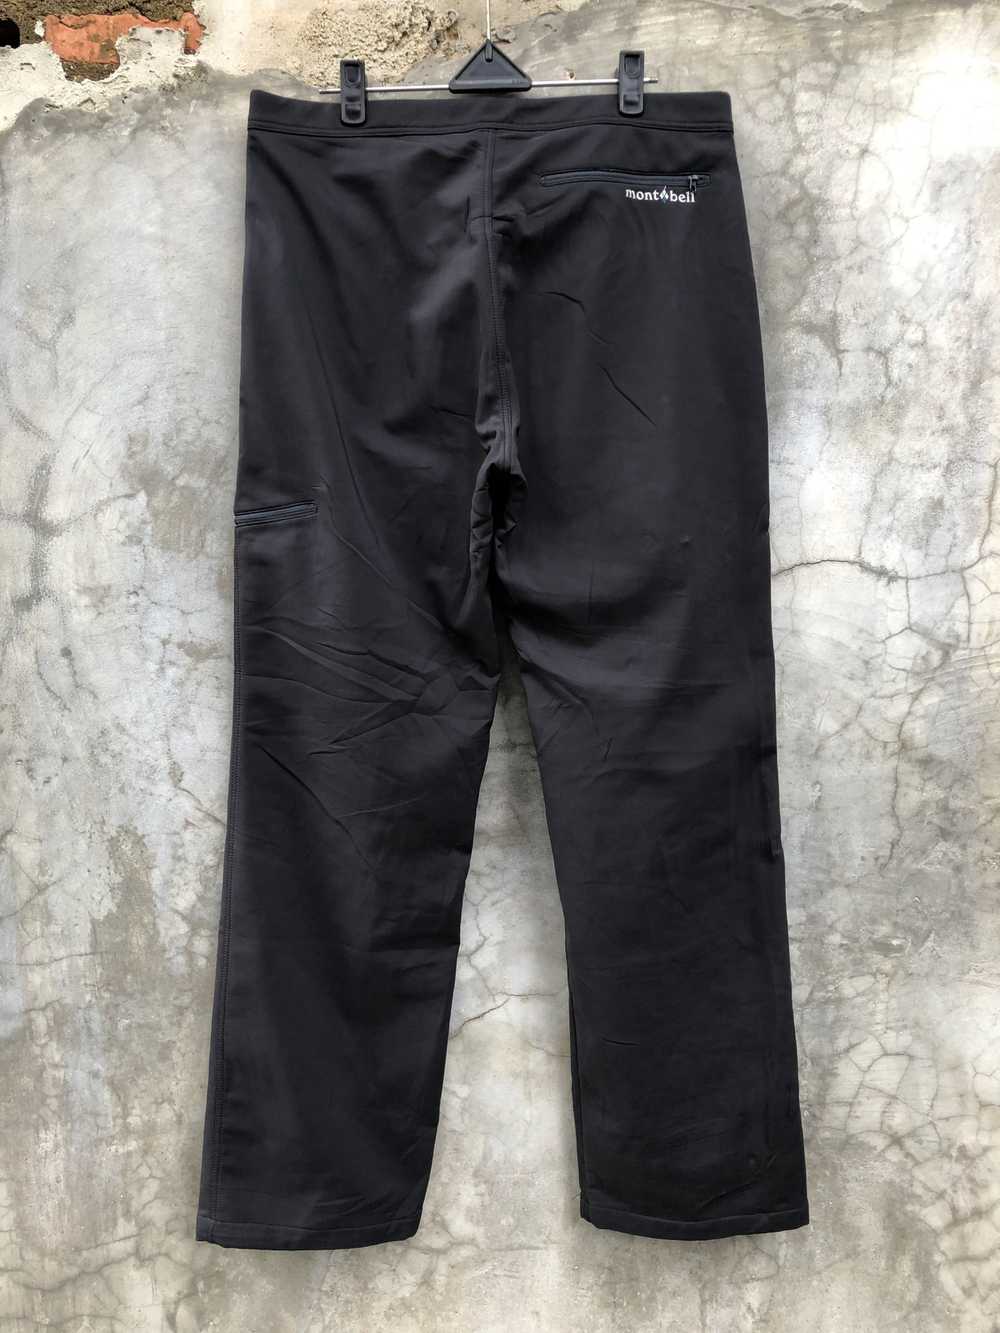 Montbell × Outdoor Life Montbell clima pro pants - image 2